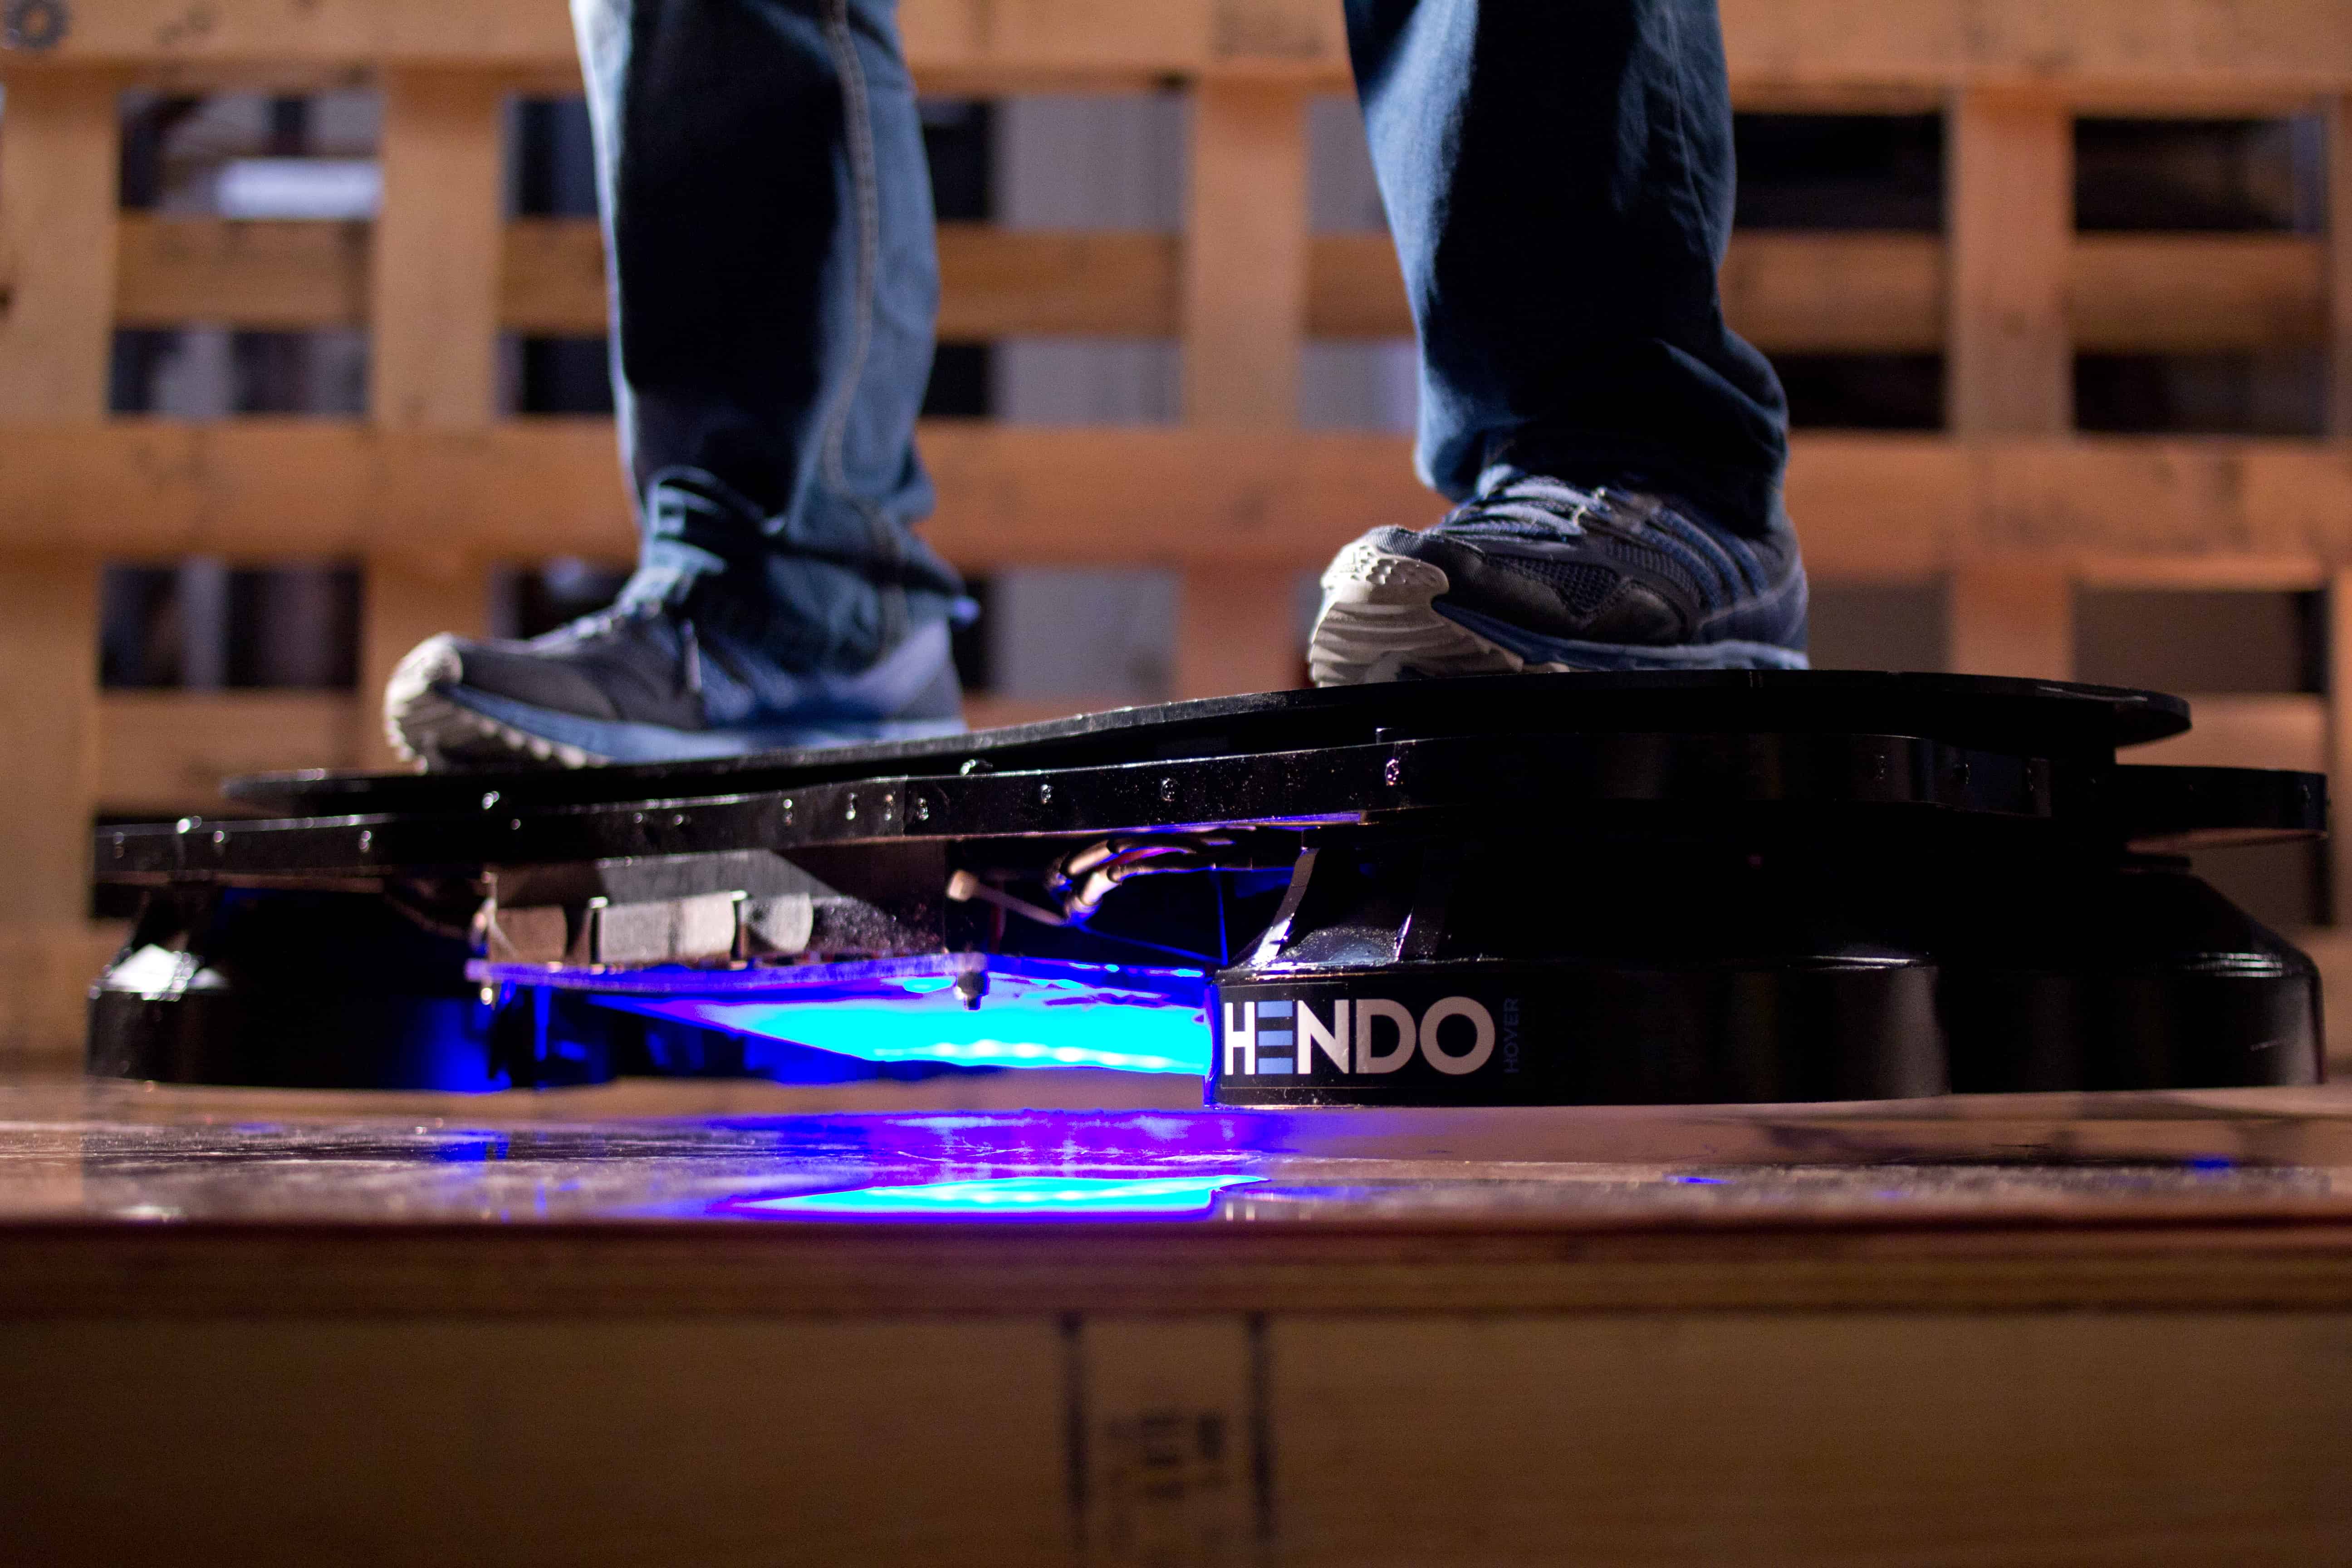 Hendo Hoverboard Cool Stuff to Buy